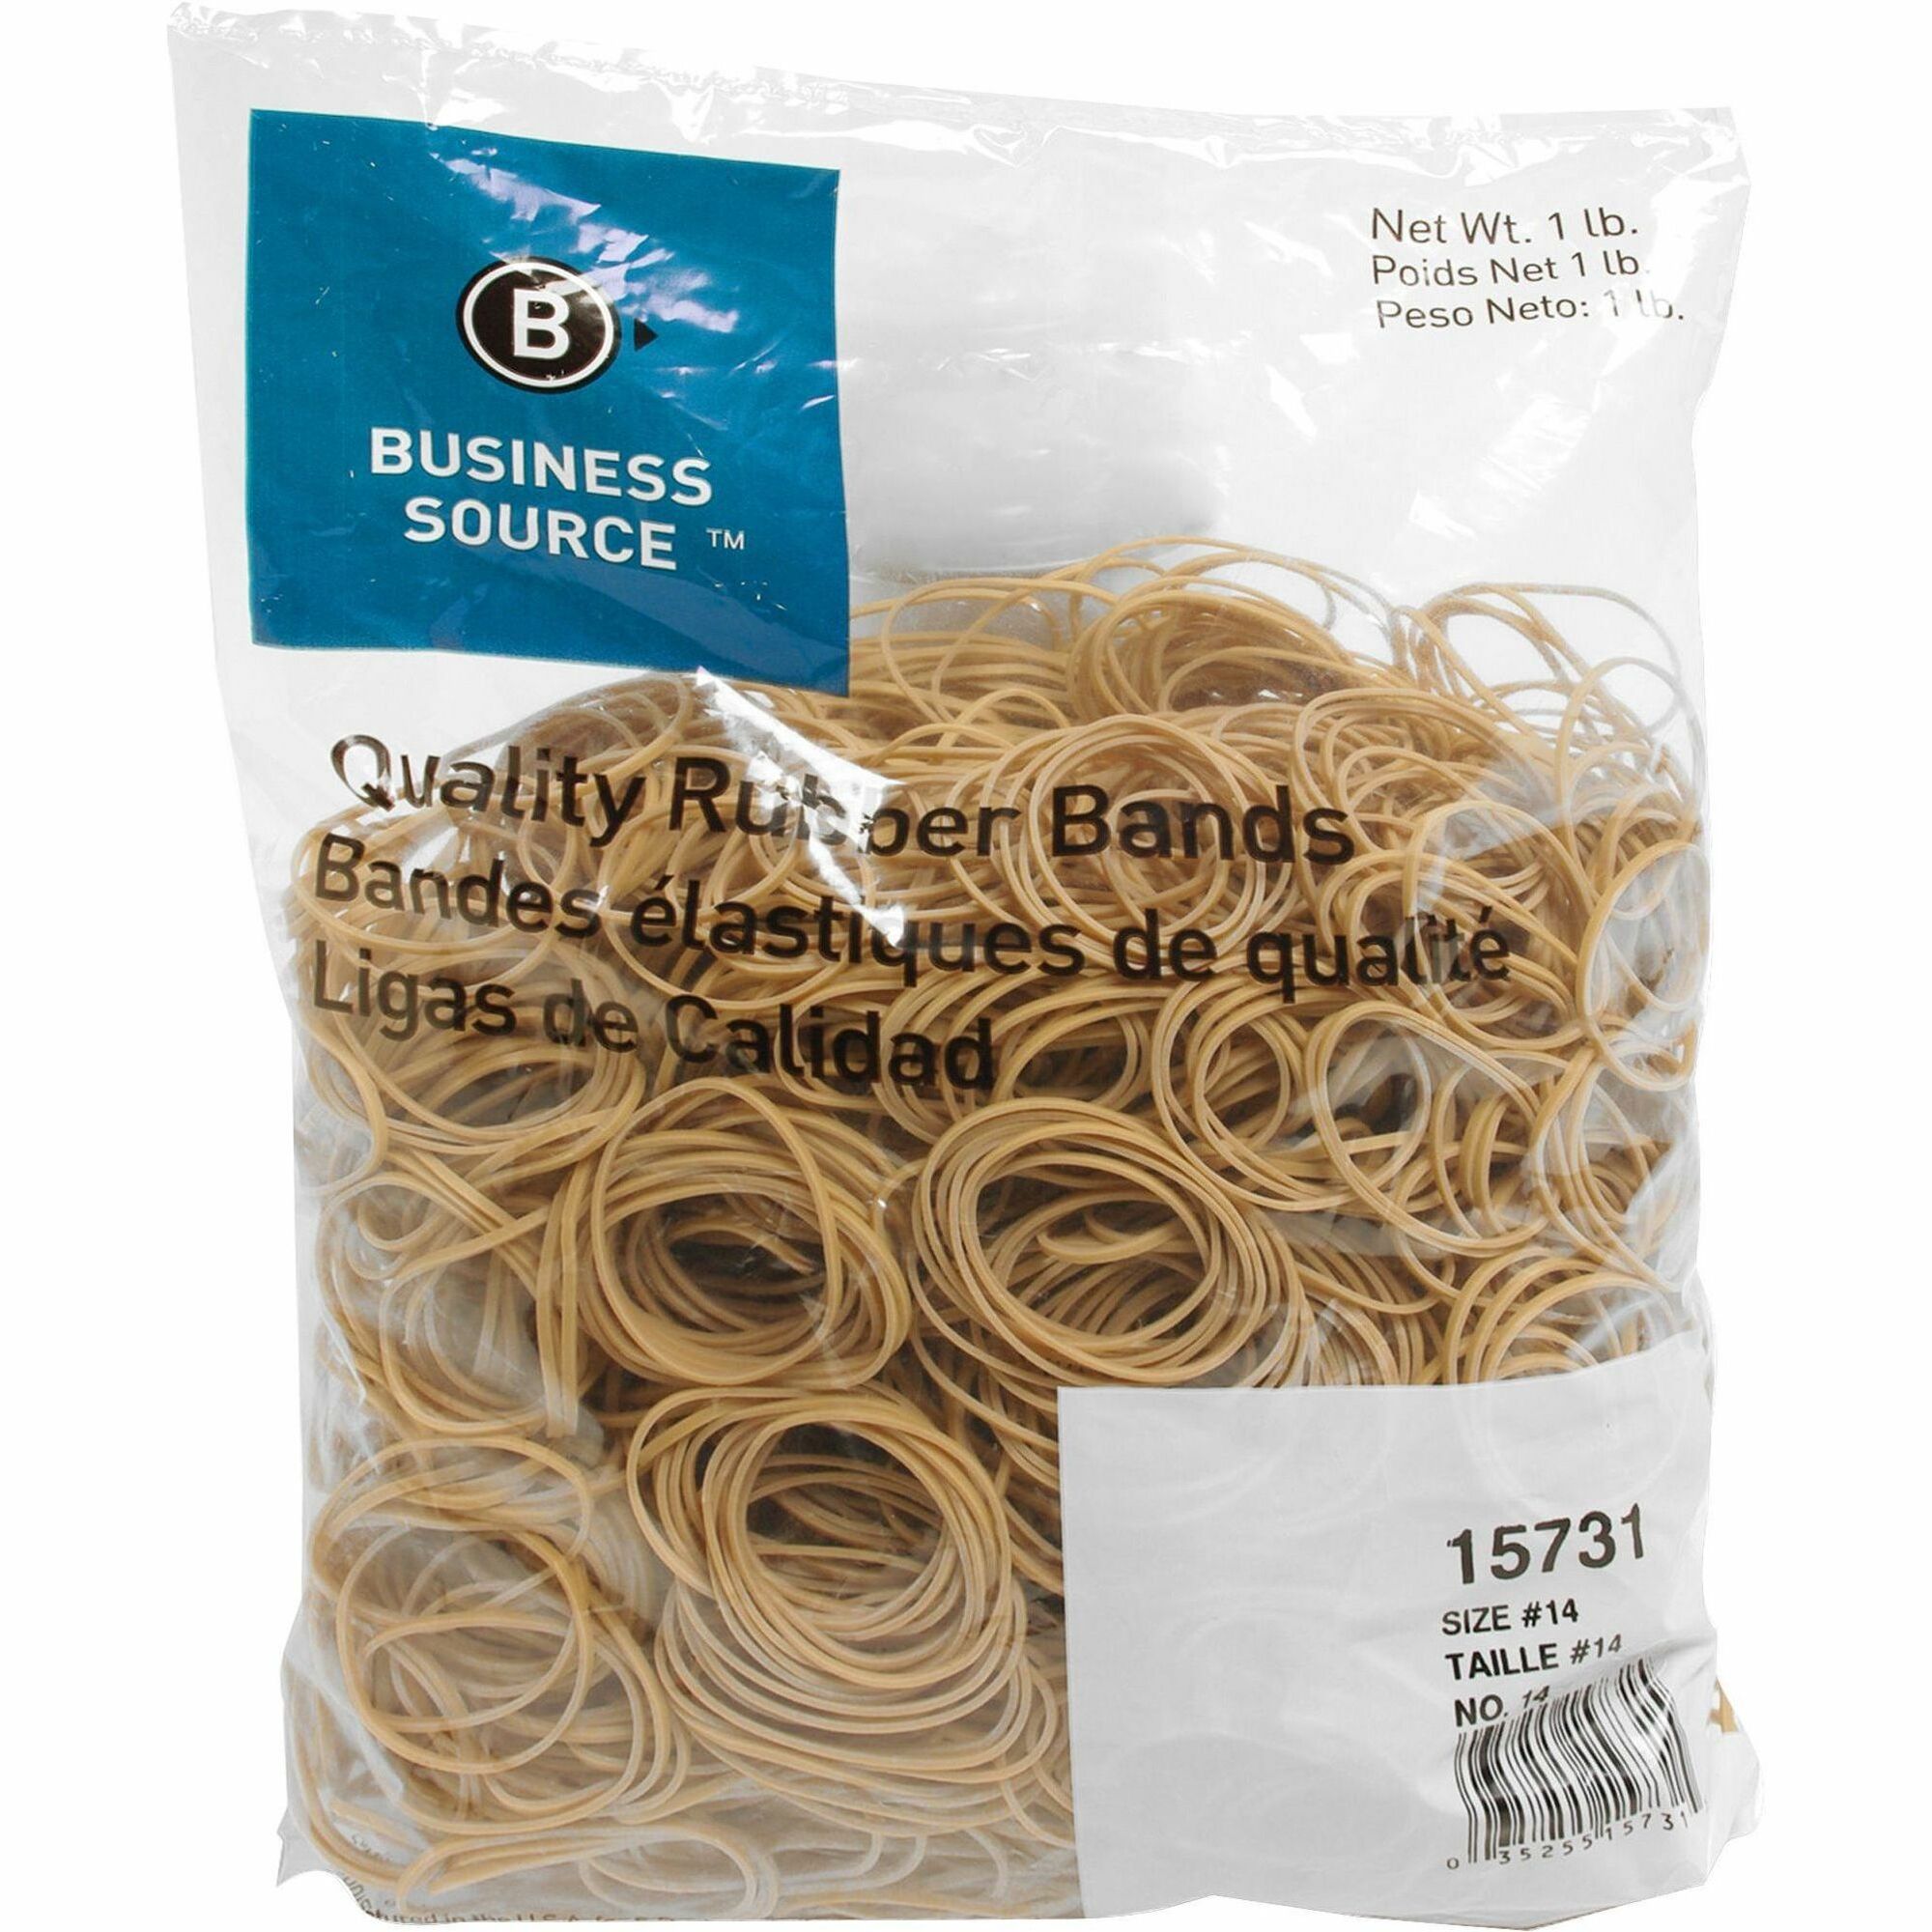 One Source Office Supplies :: Office Supplies :: General Supplies :: Clips,  Tacks & Rubber Bands :: Rubber Bands :: Business Source Quality Rubber Bands  - Size: #14 - 2 (50.80 mm)